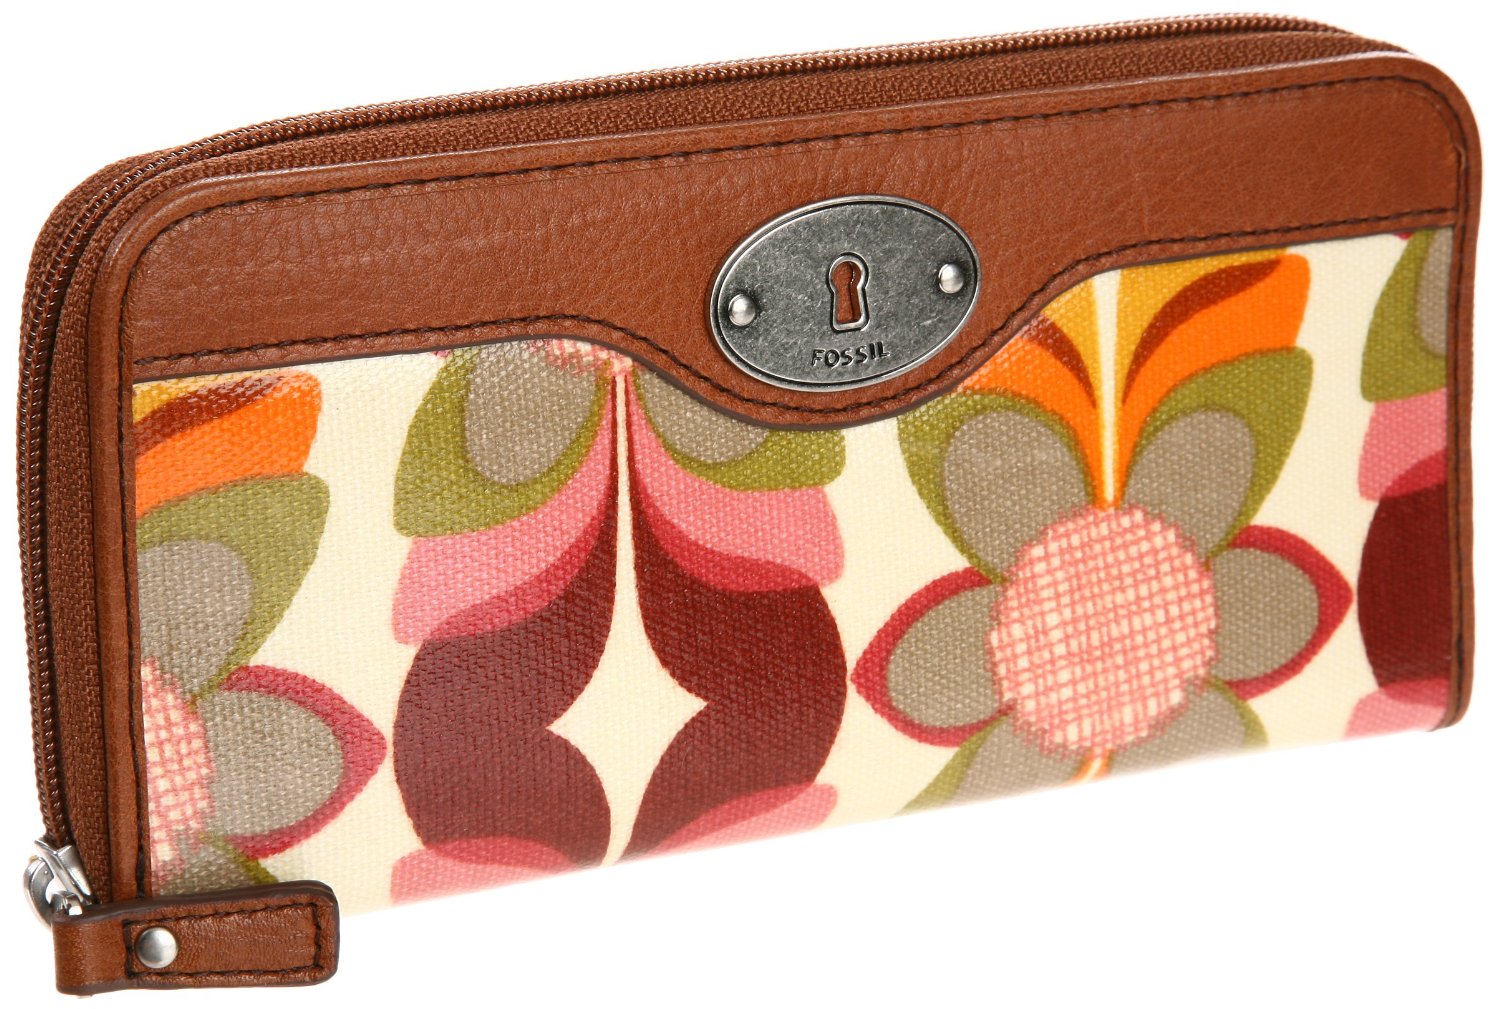 WATCH ME ACCESSORIZE MYSELF: SALE : FOSSIL WALLETS